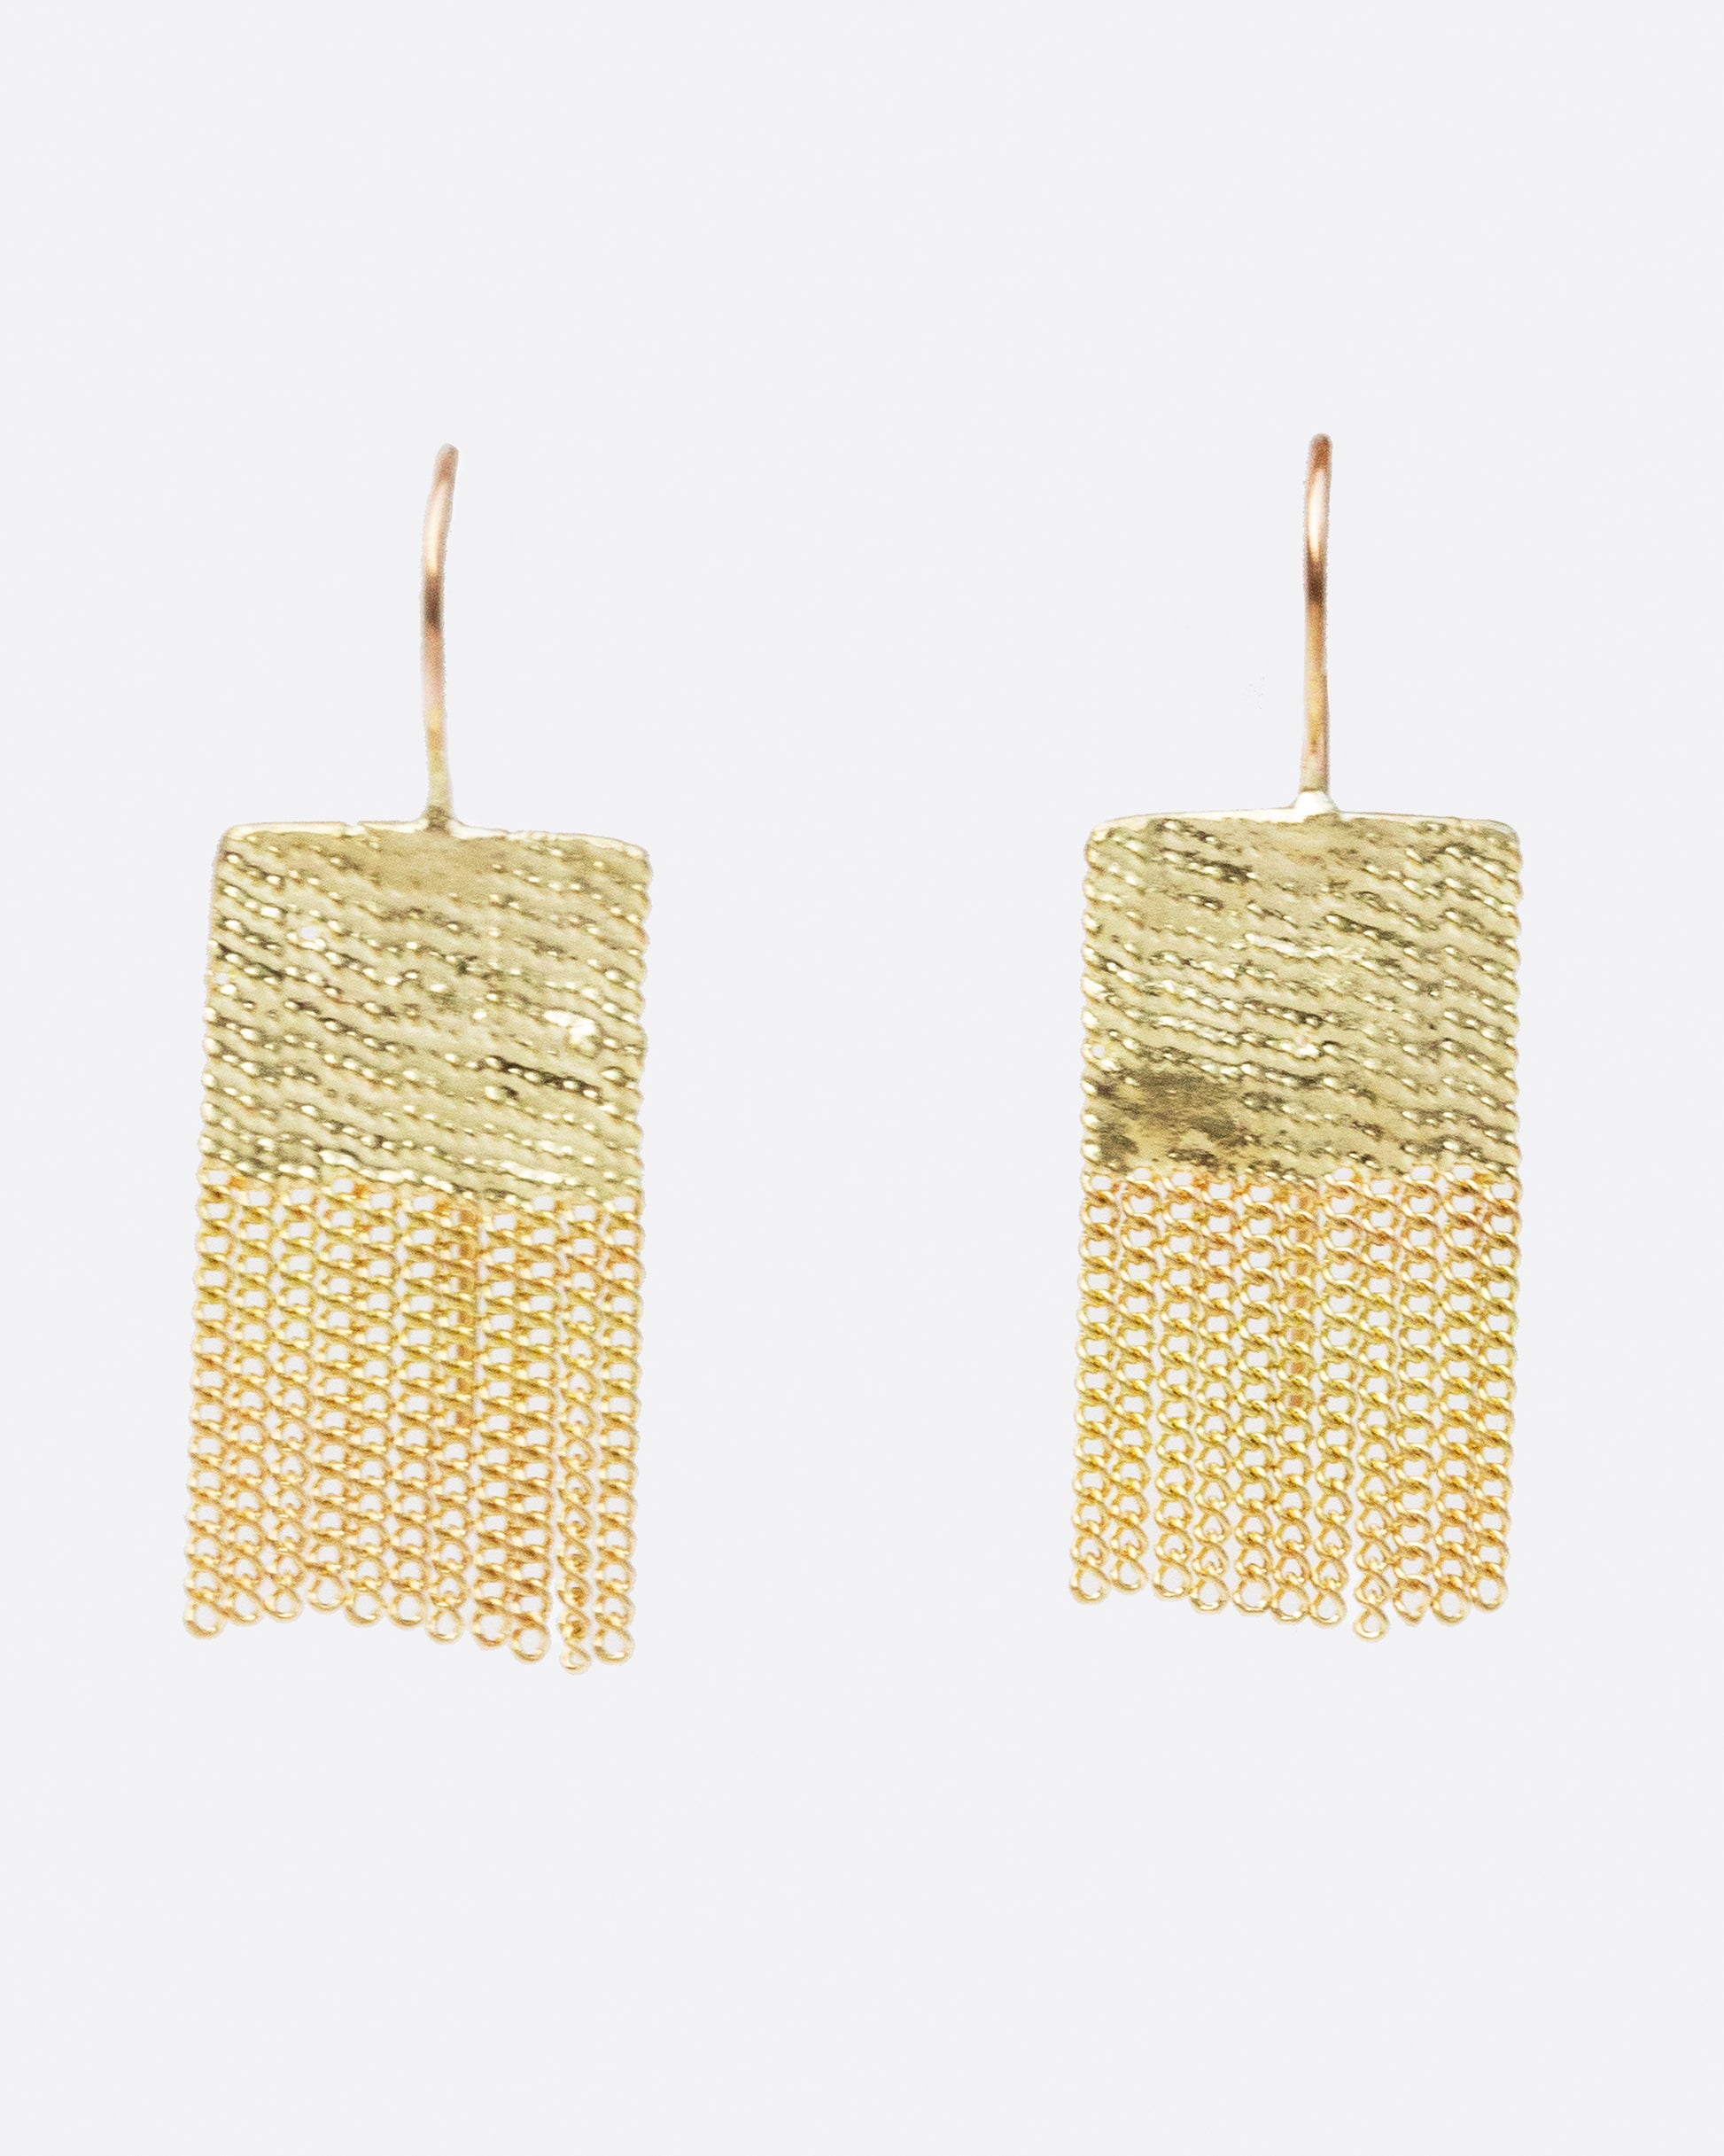 Beautiful 18k yellow gold chains dangle together and form a rectangle, for an earring full of movement.